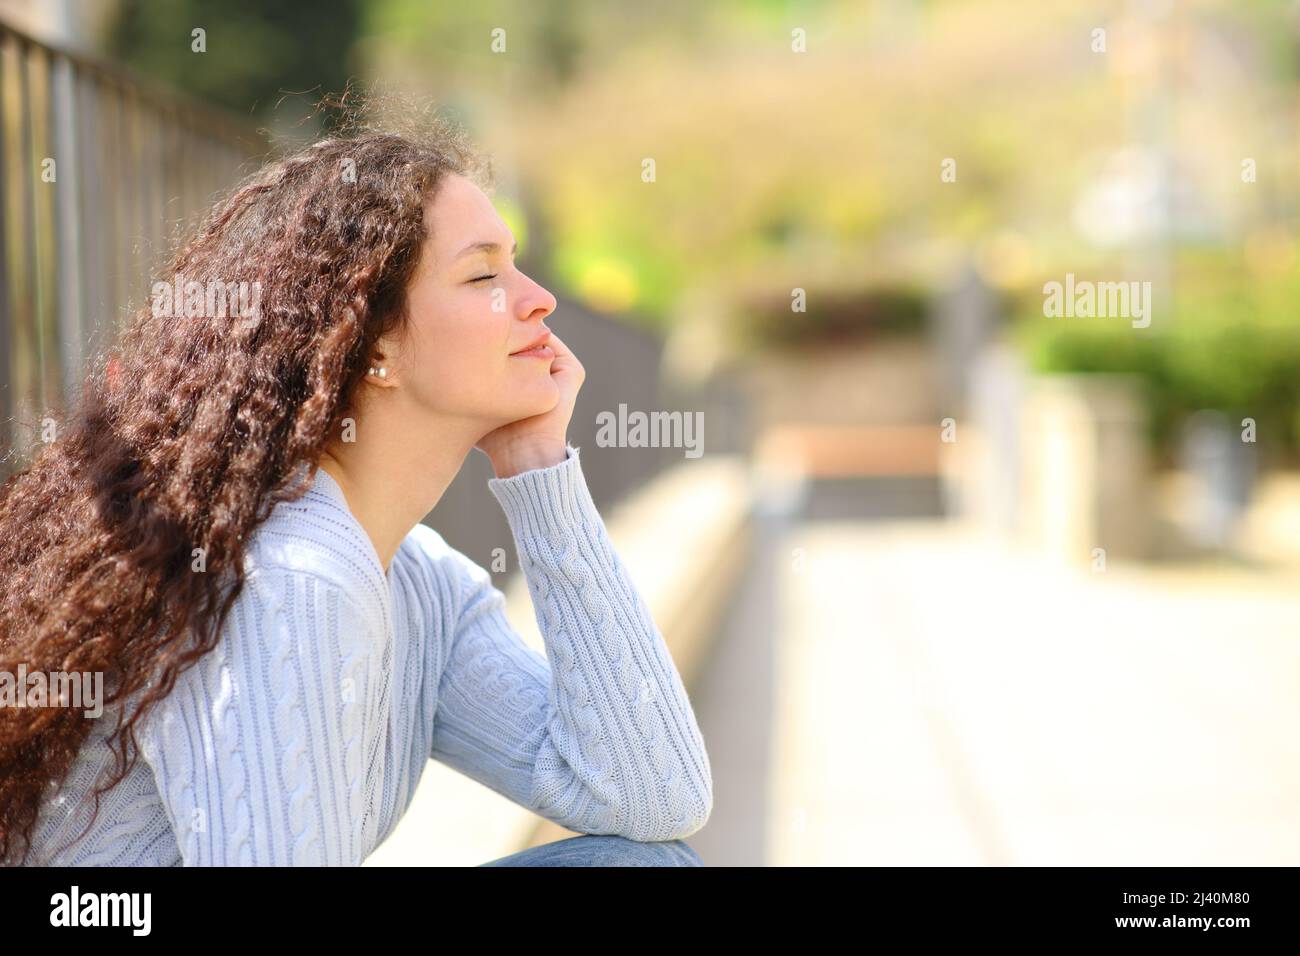 Profile of a woman relaxing a sunny day in a park Stock Photo